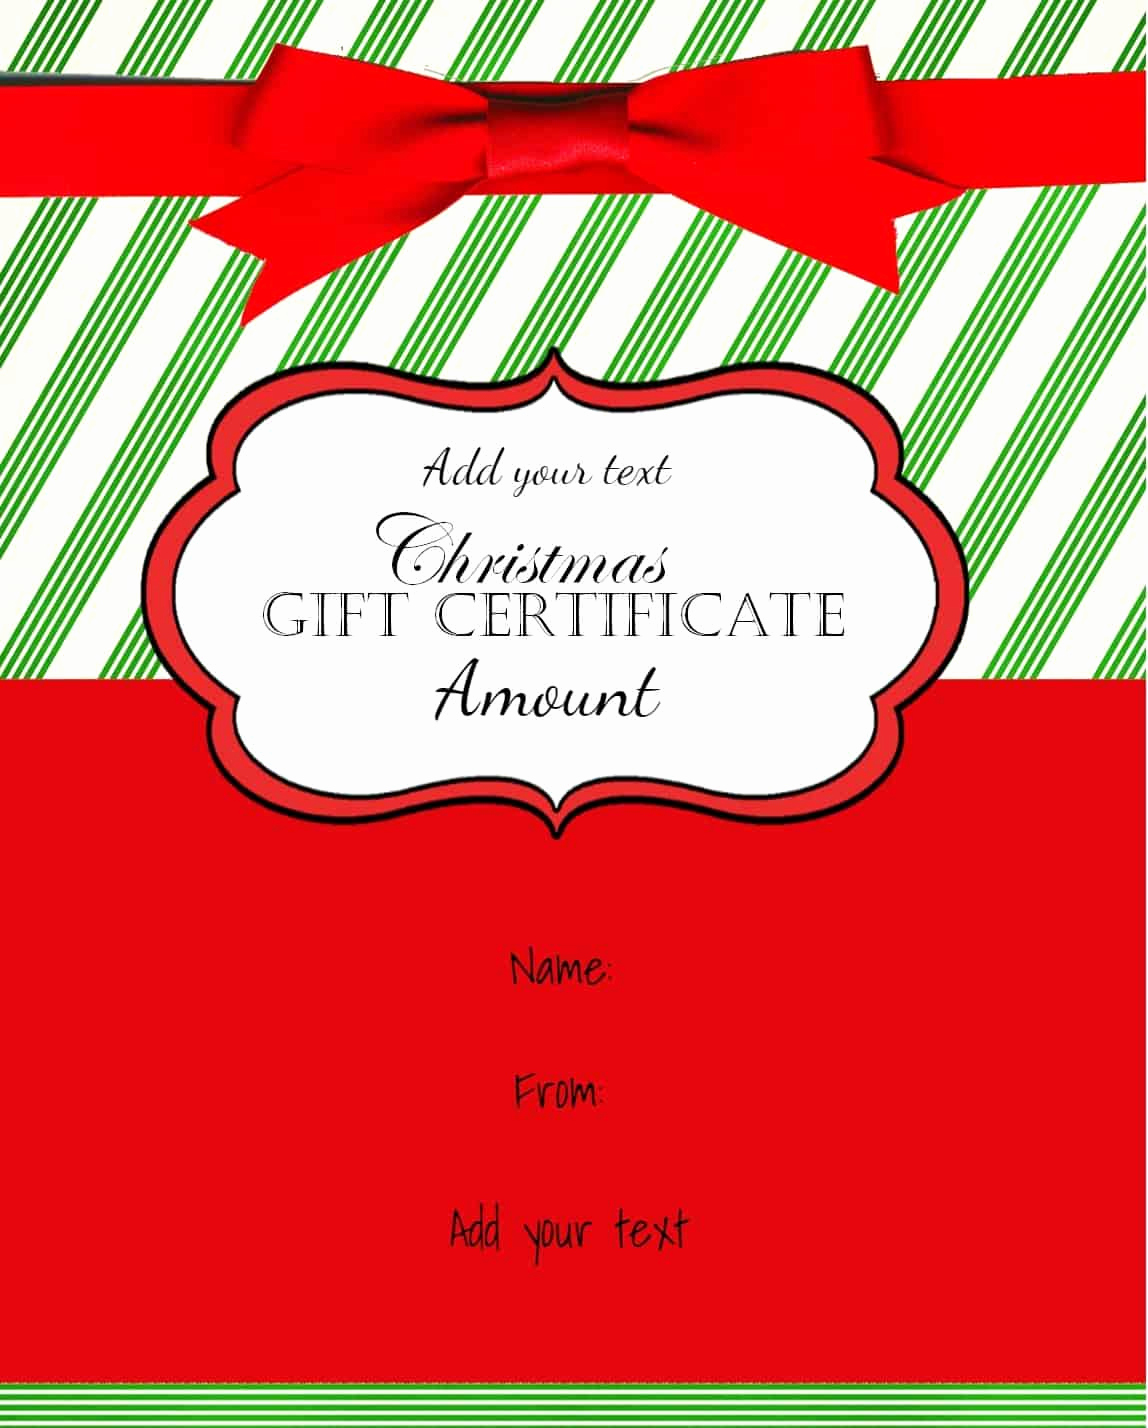 Free Holiday Gift Certificate Template Elegant Free Christmas Gift Certificate Template